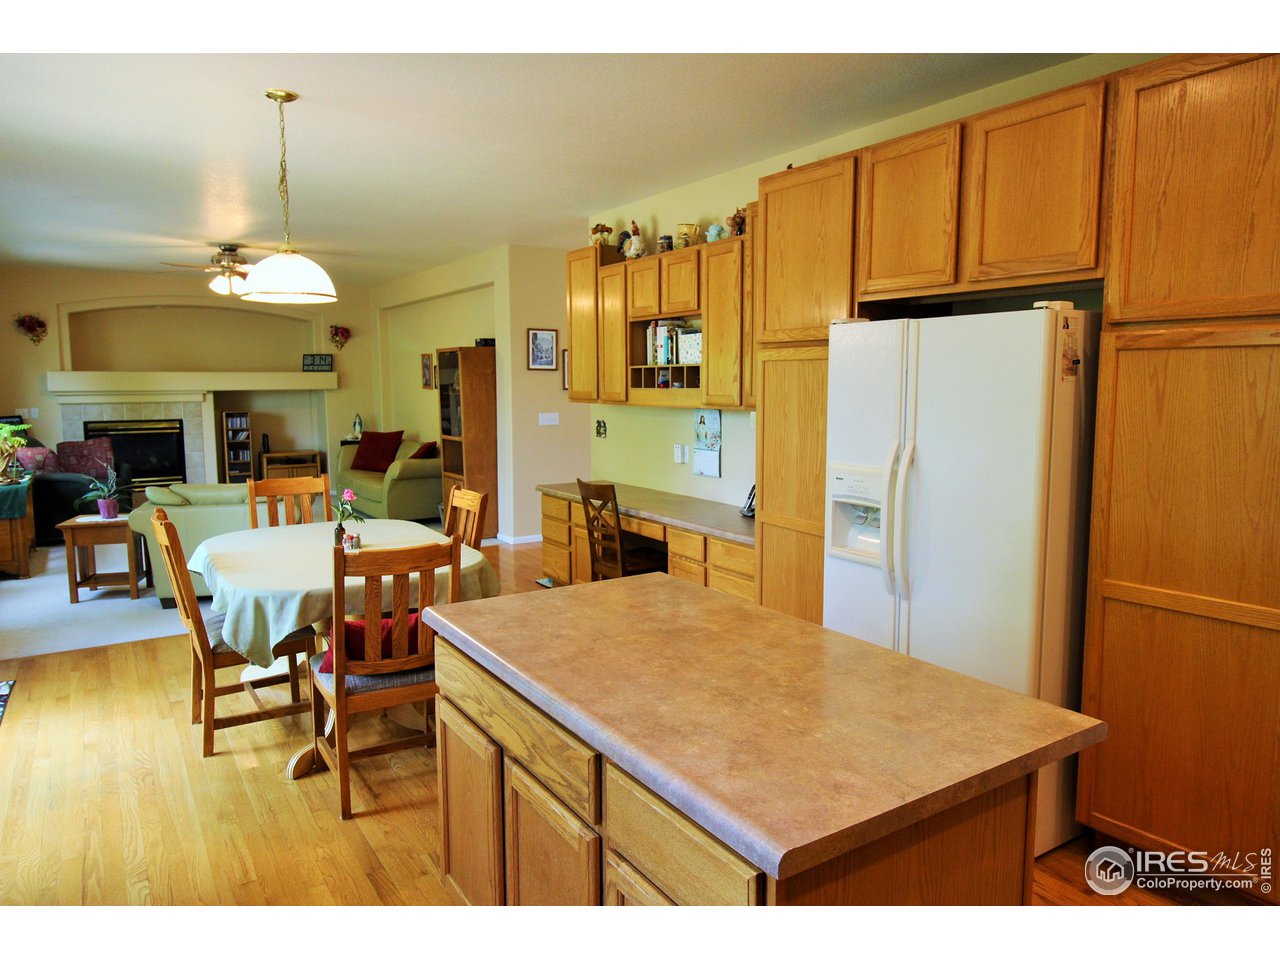 Cooks kitchen with center island, double ovens, cooktop, built-in microwave and stainless dishwasher.